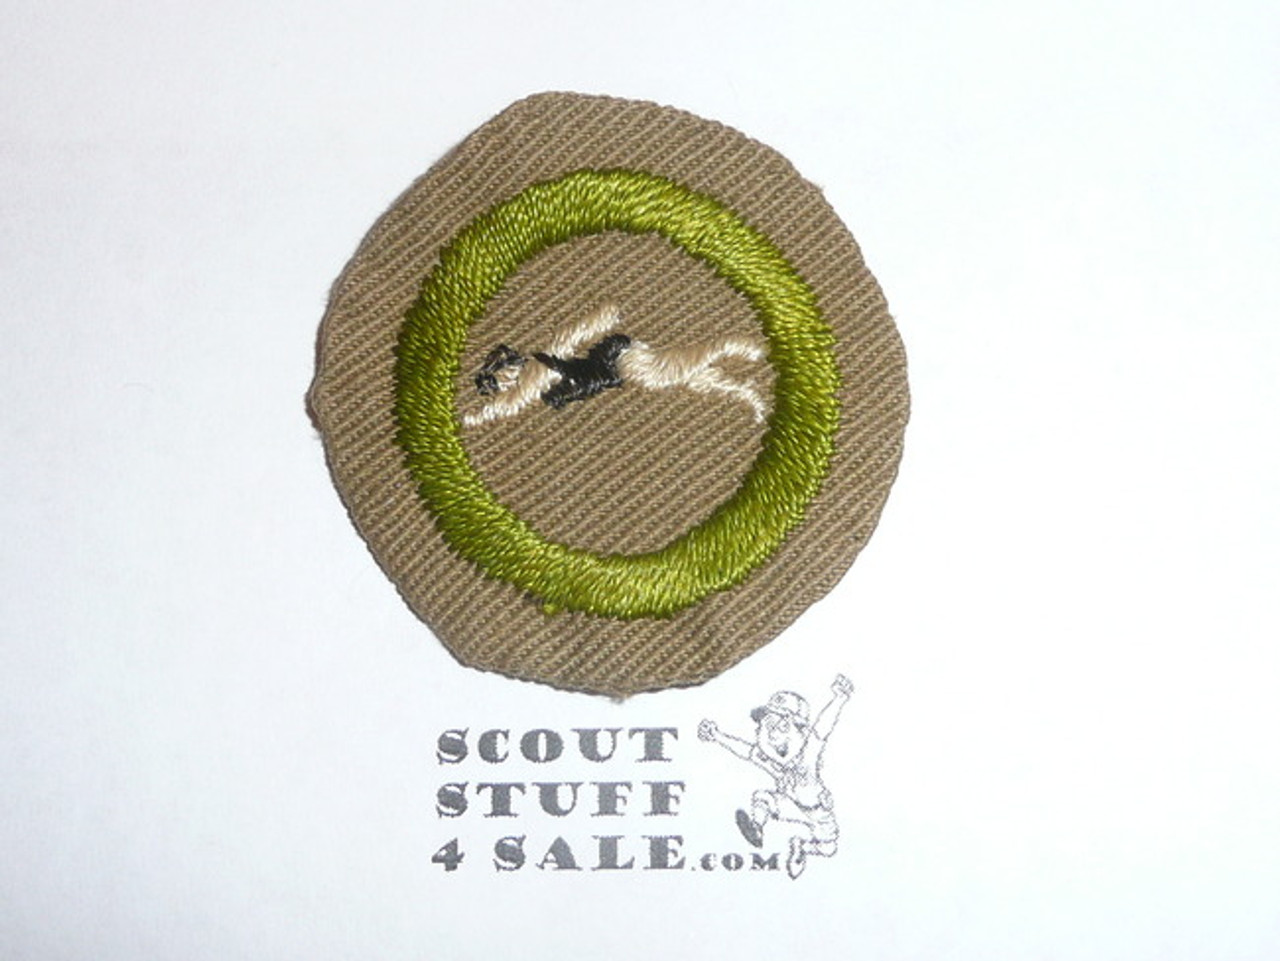 Swimming - Type B - Wide Crimped Bdr Tan Merit Badge (1934-1935), was sewn but in very good condition